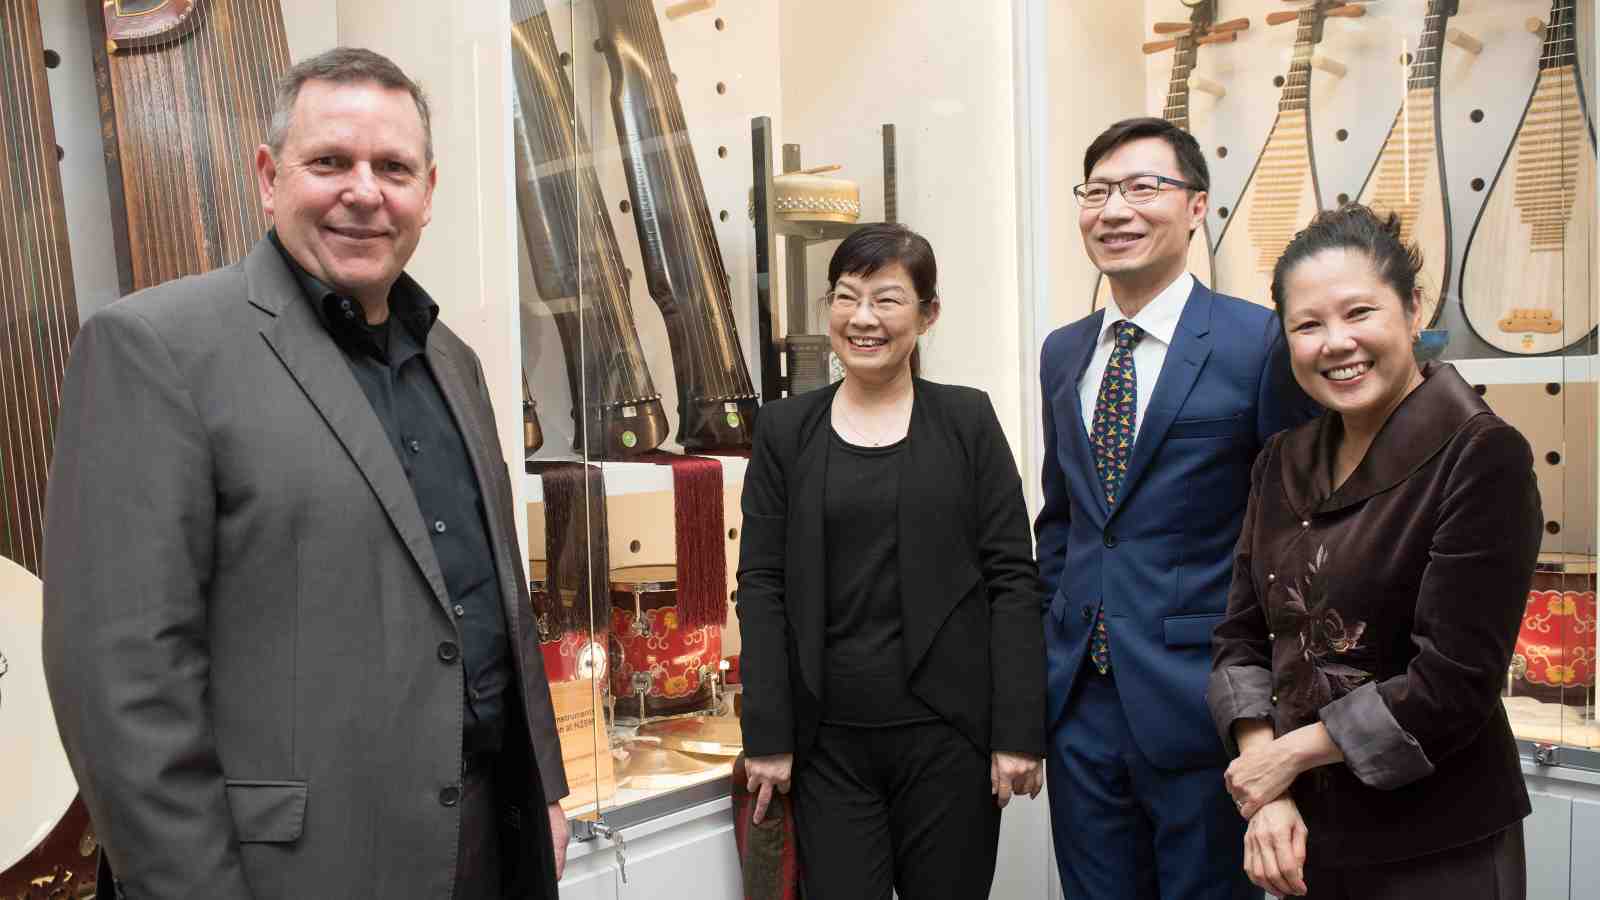 Director of NZSM Euan stands in front of the new instruments with members of the Confucius Institute